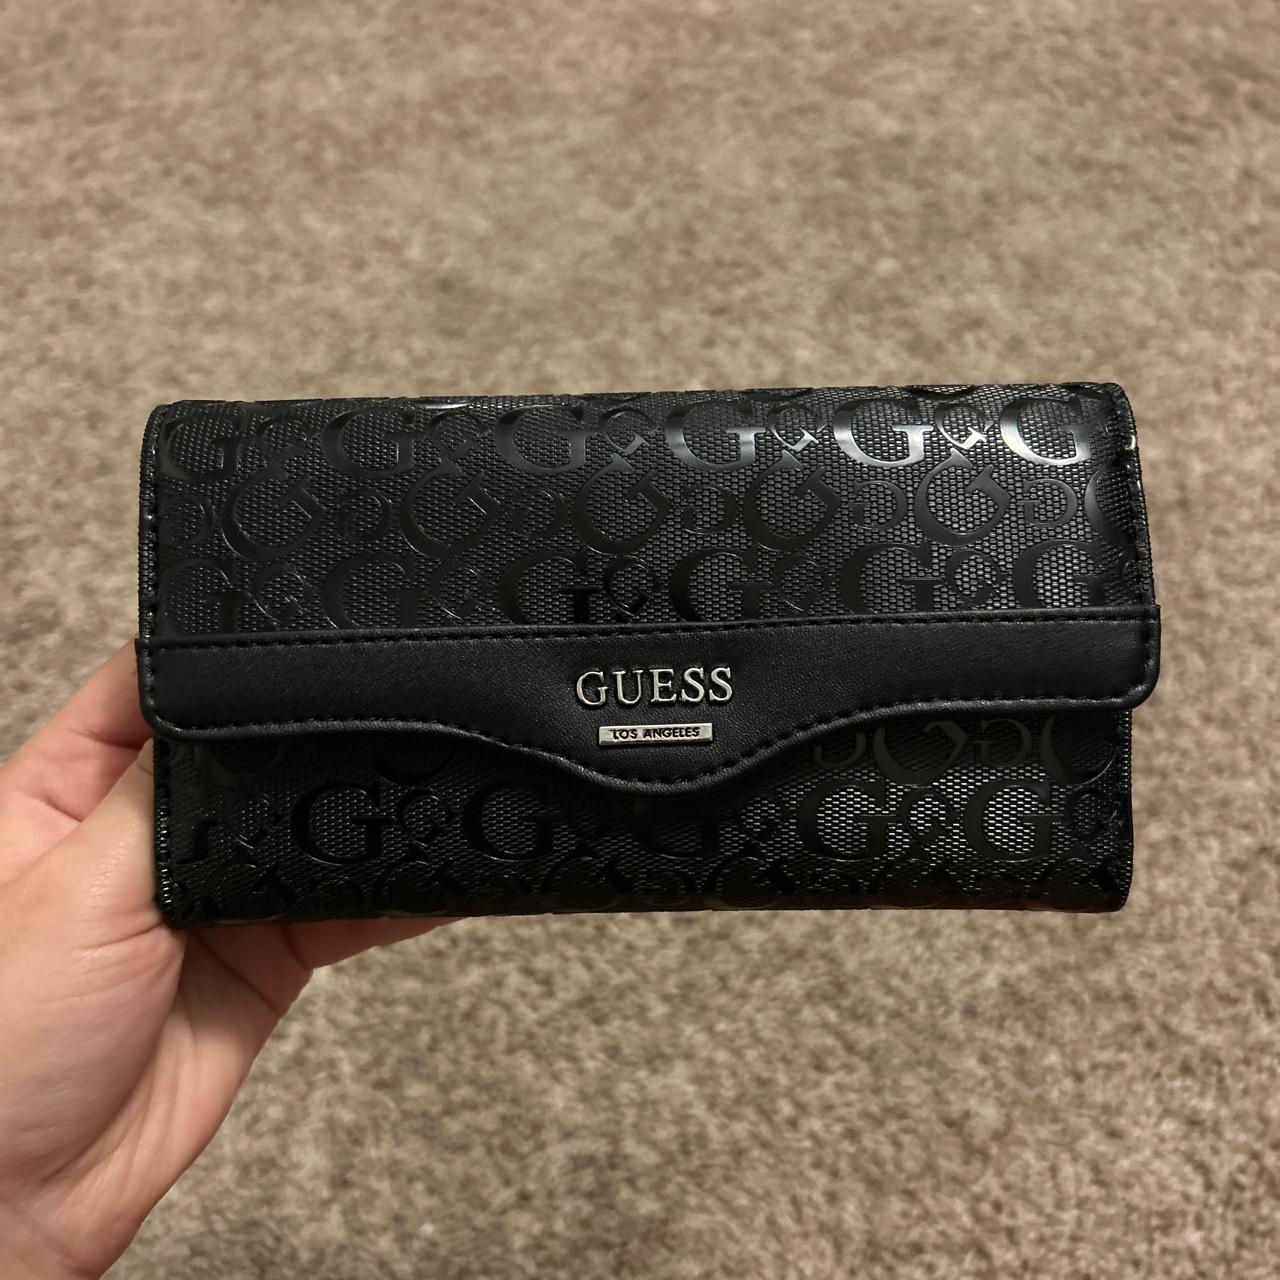 Guess, Bags, Guess Los Angeles Black Wallet Nwt